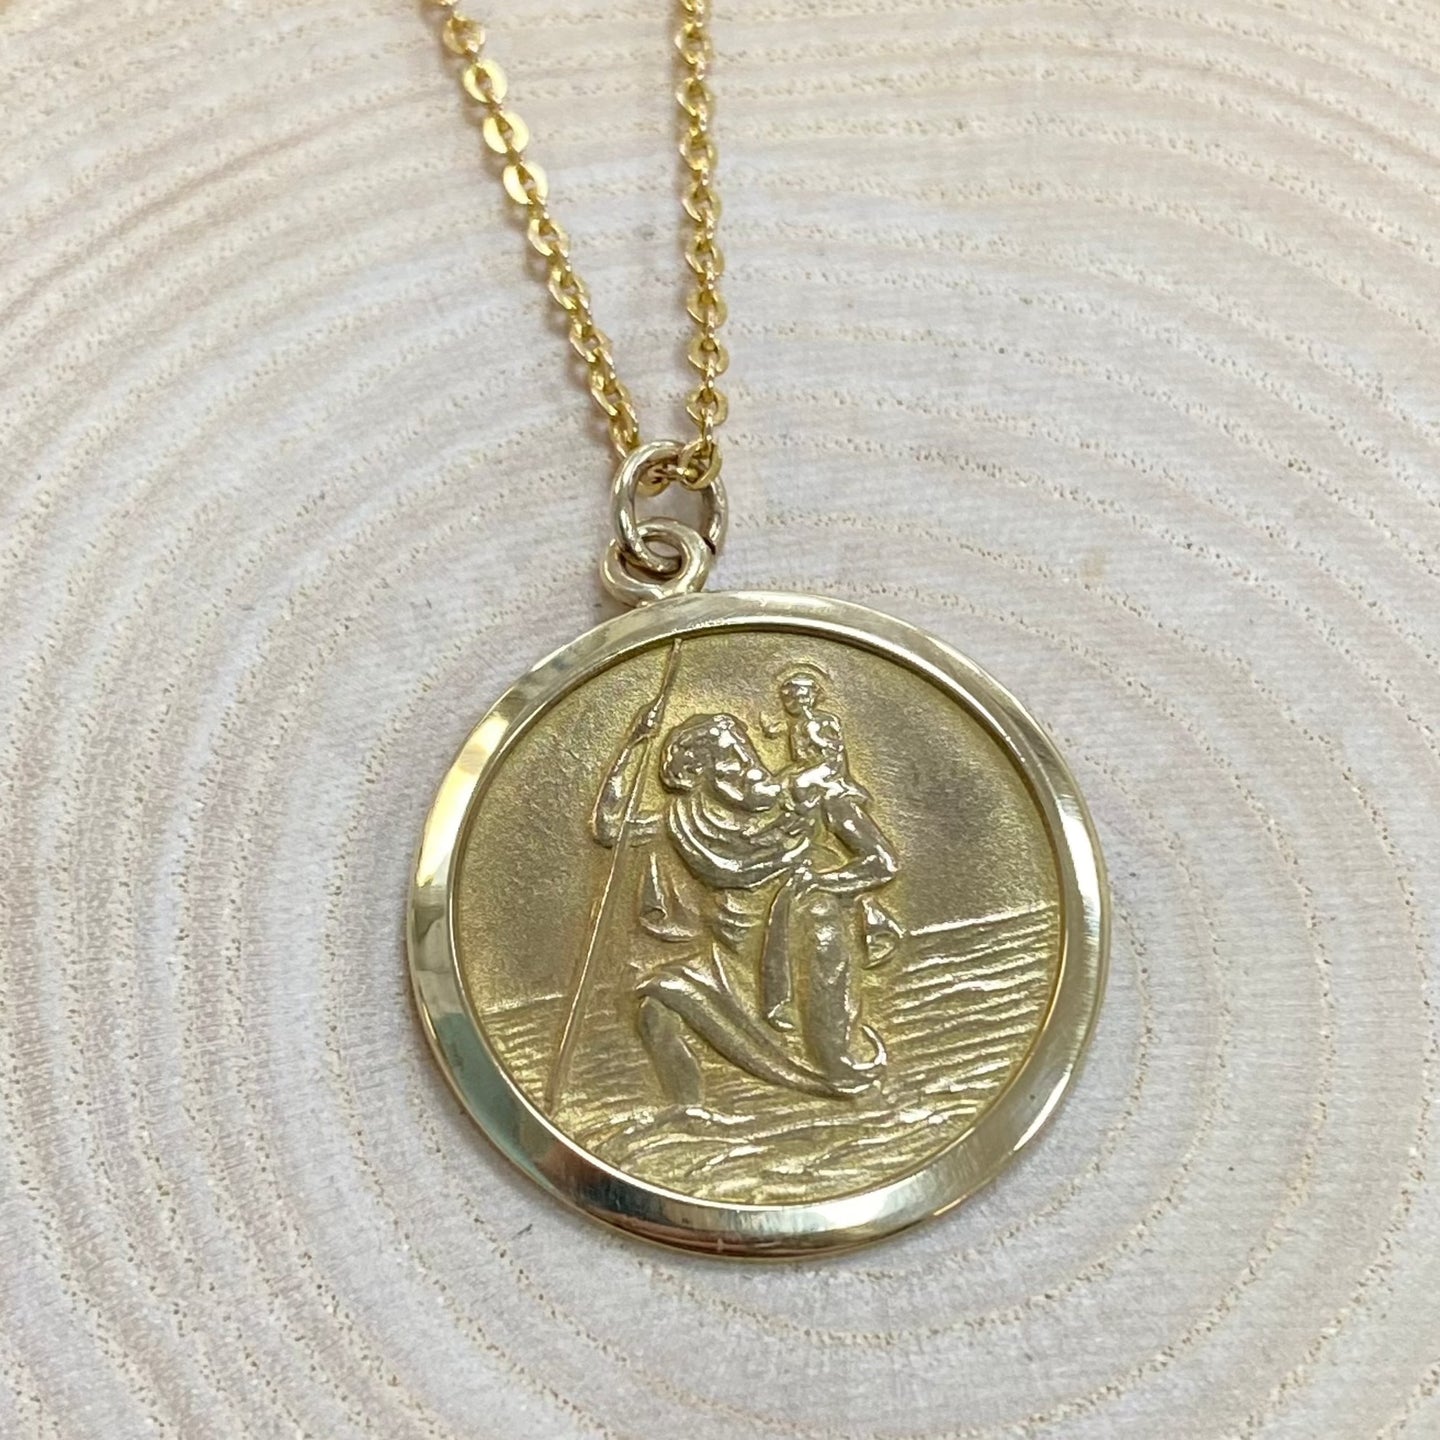 Preloved 9ct Yellow Gold St Christopher Pendant and Chain